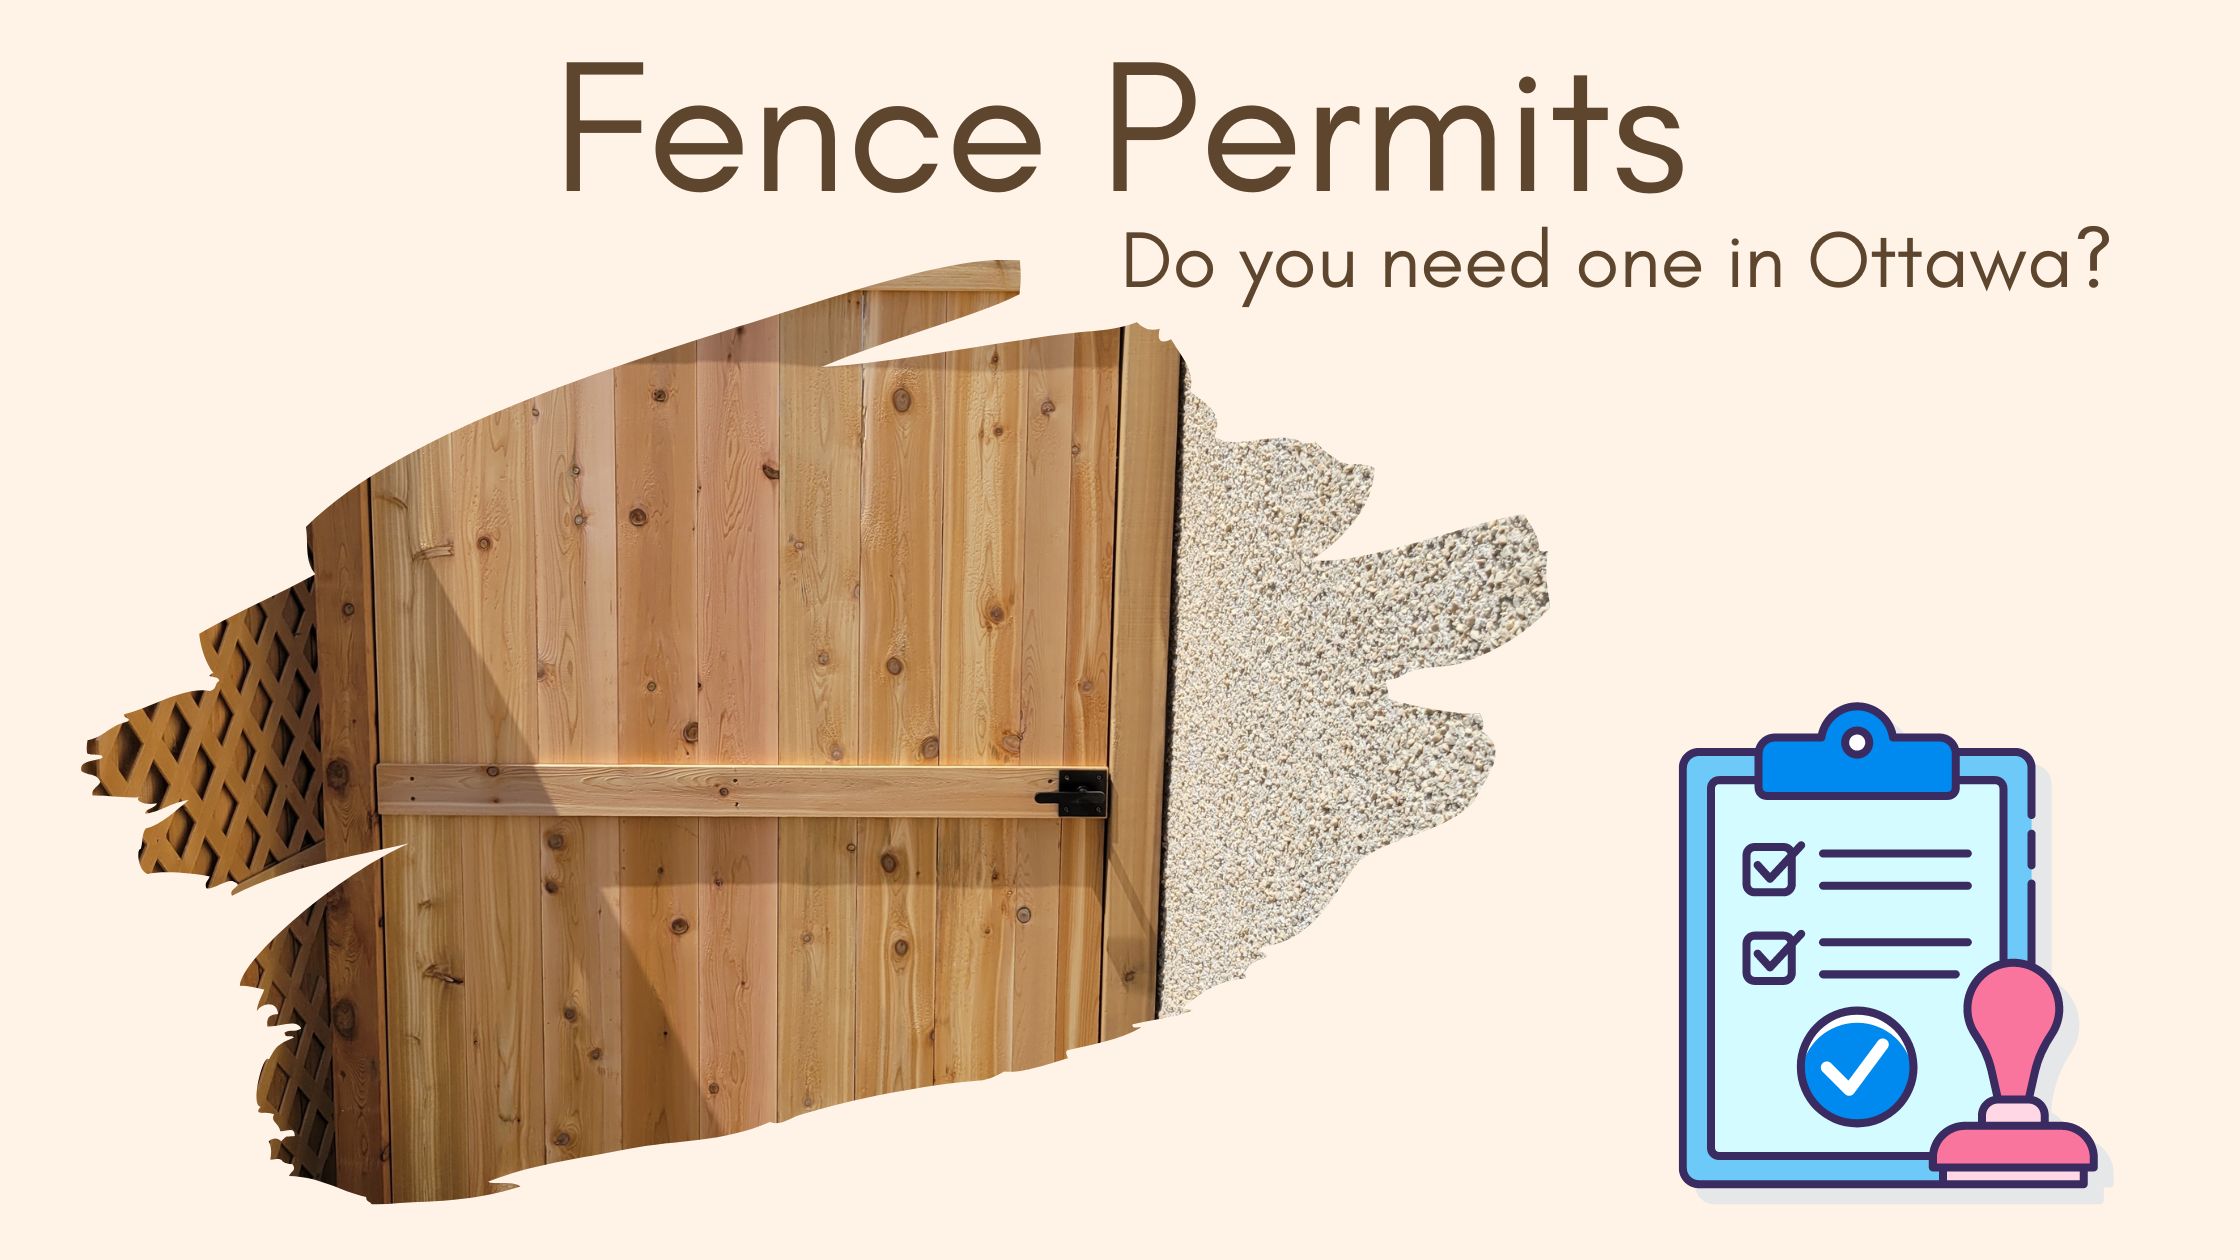 Do you need a fence permit in Ottawa?